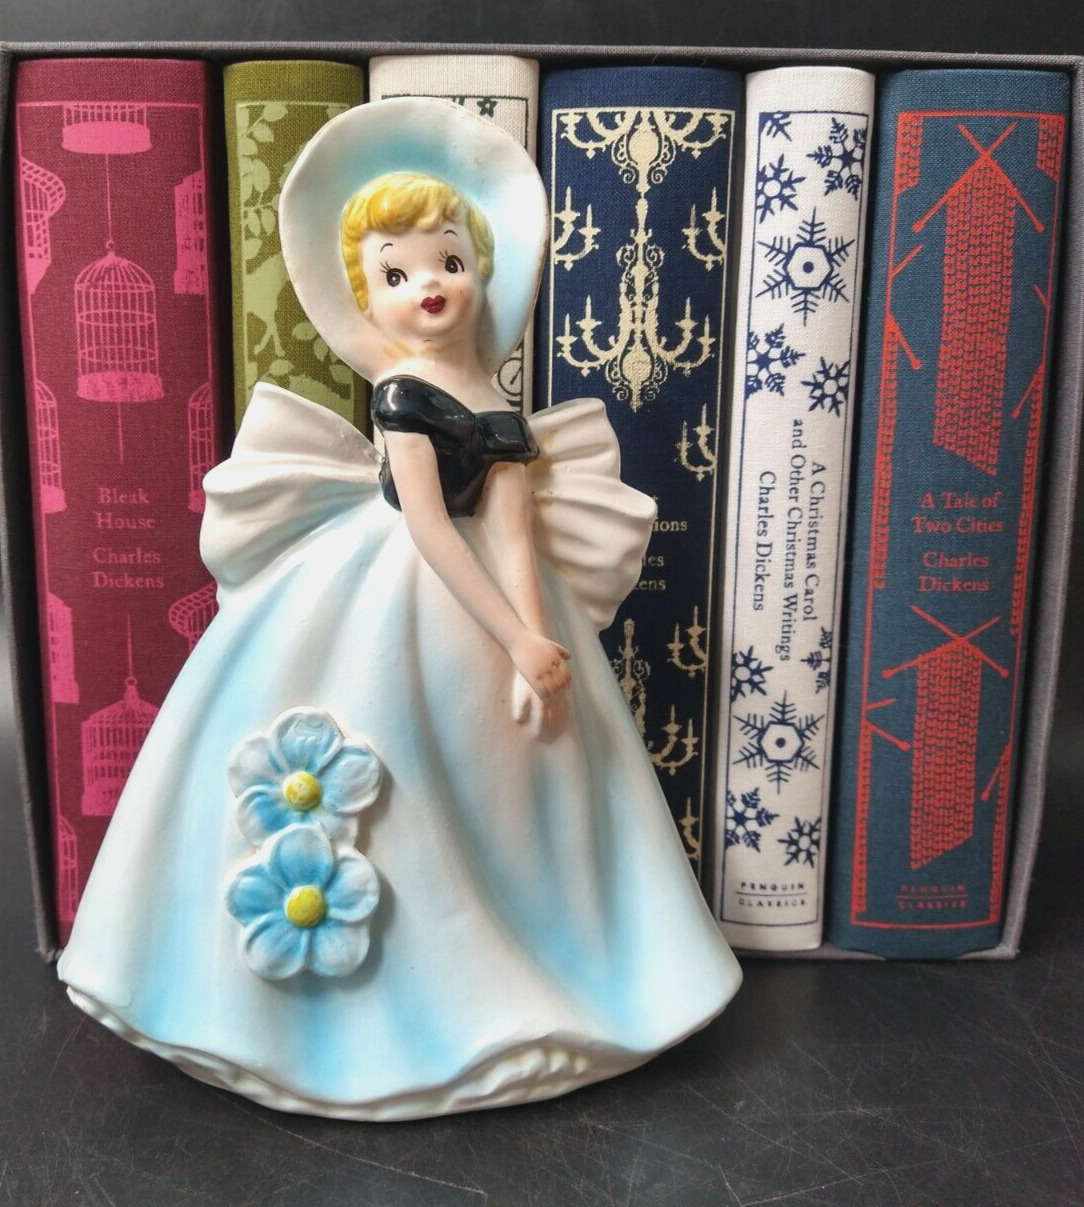 Ucagco Young Girl with Bonnet and Flowers Figurine - 1950's